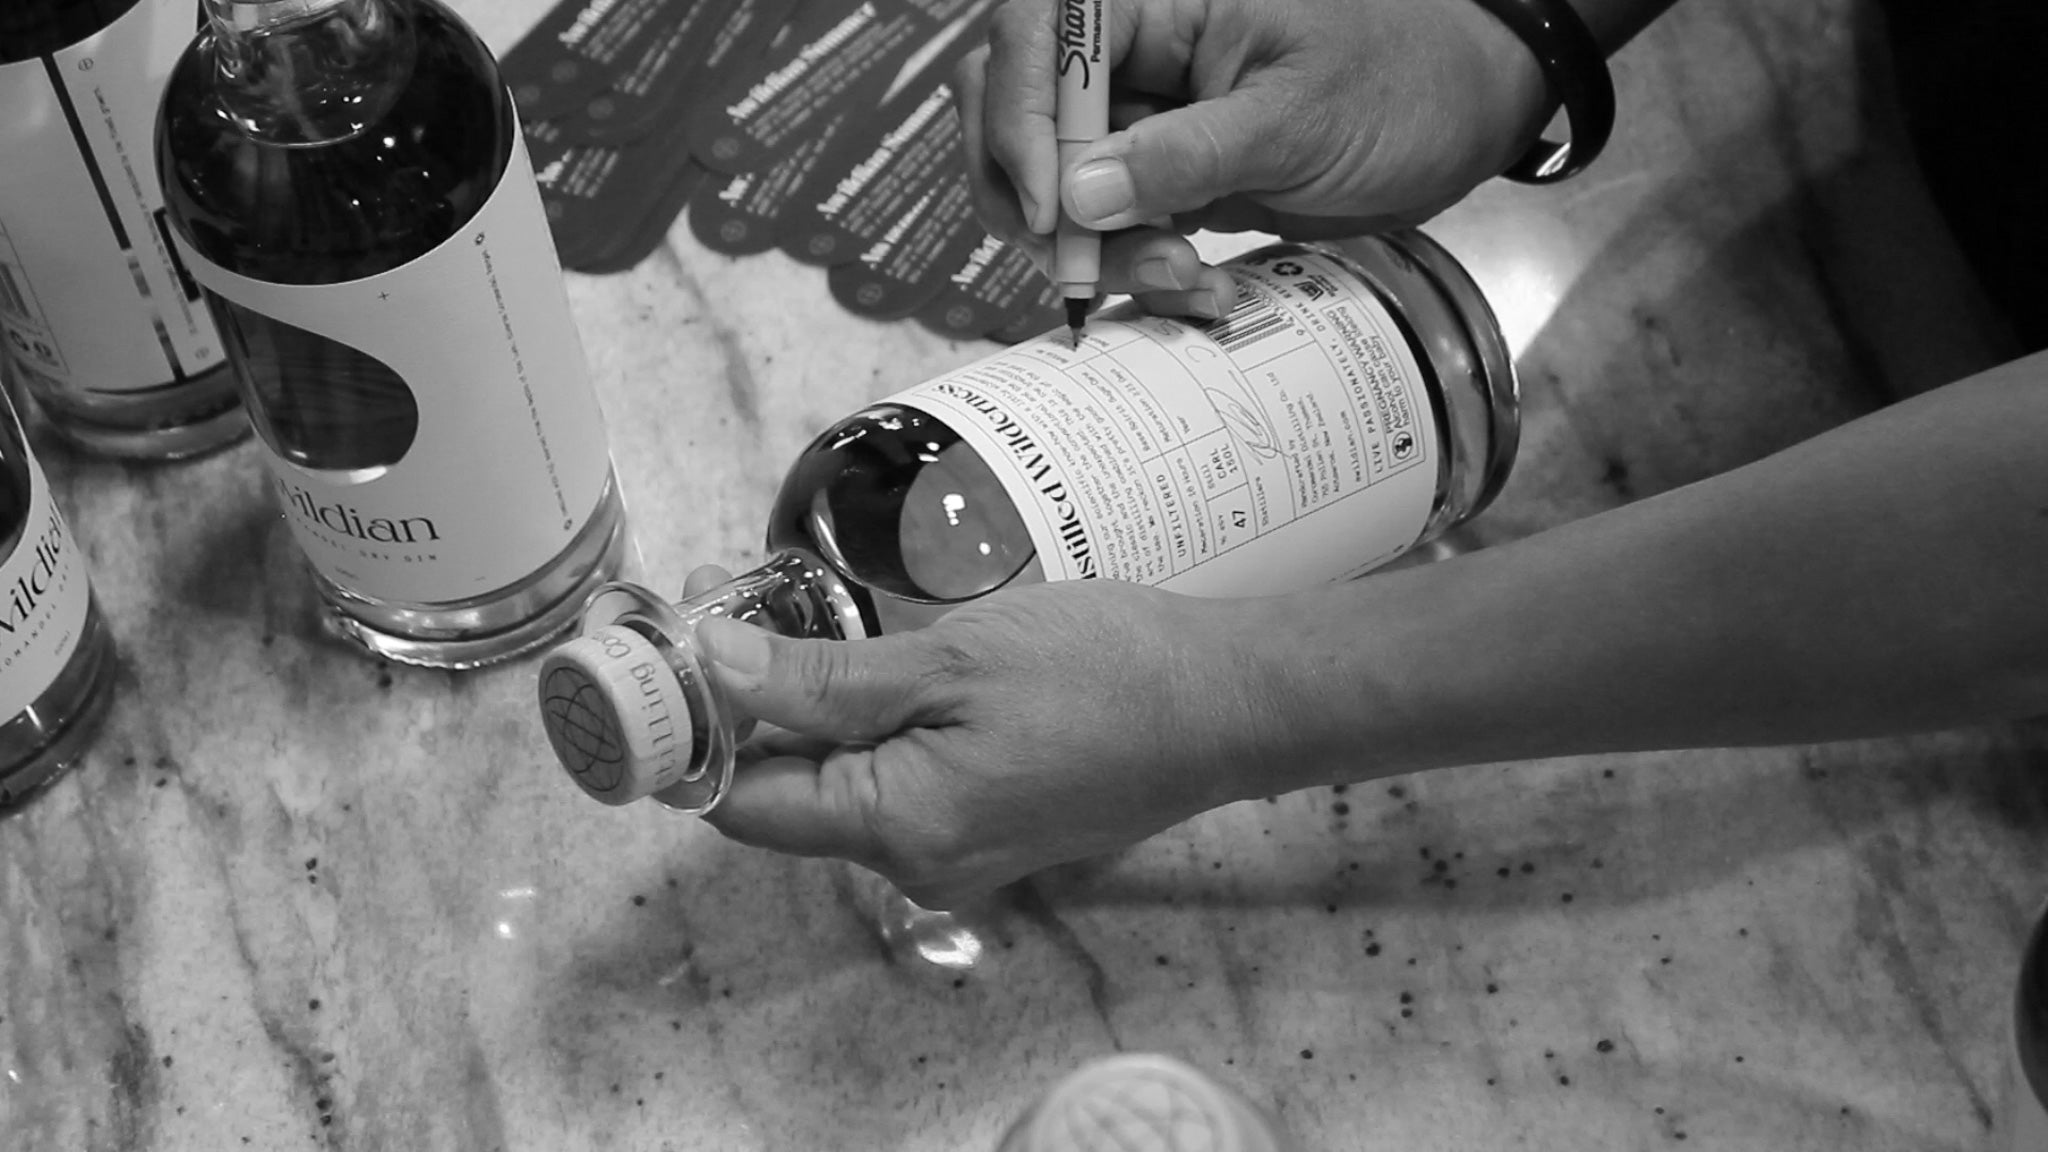 Awildian Gin is bottled and labelled by hand in our Thames gin distillery